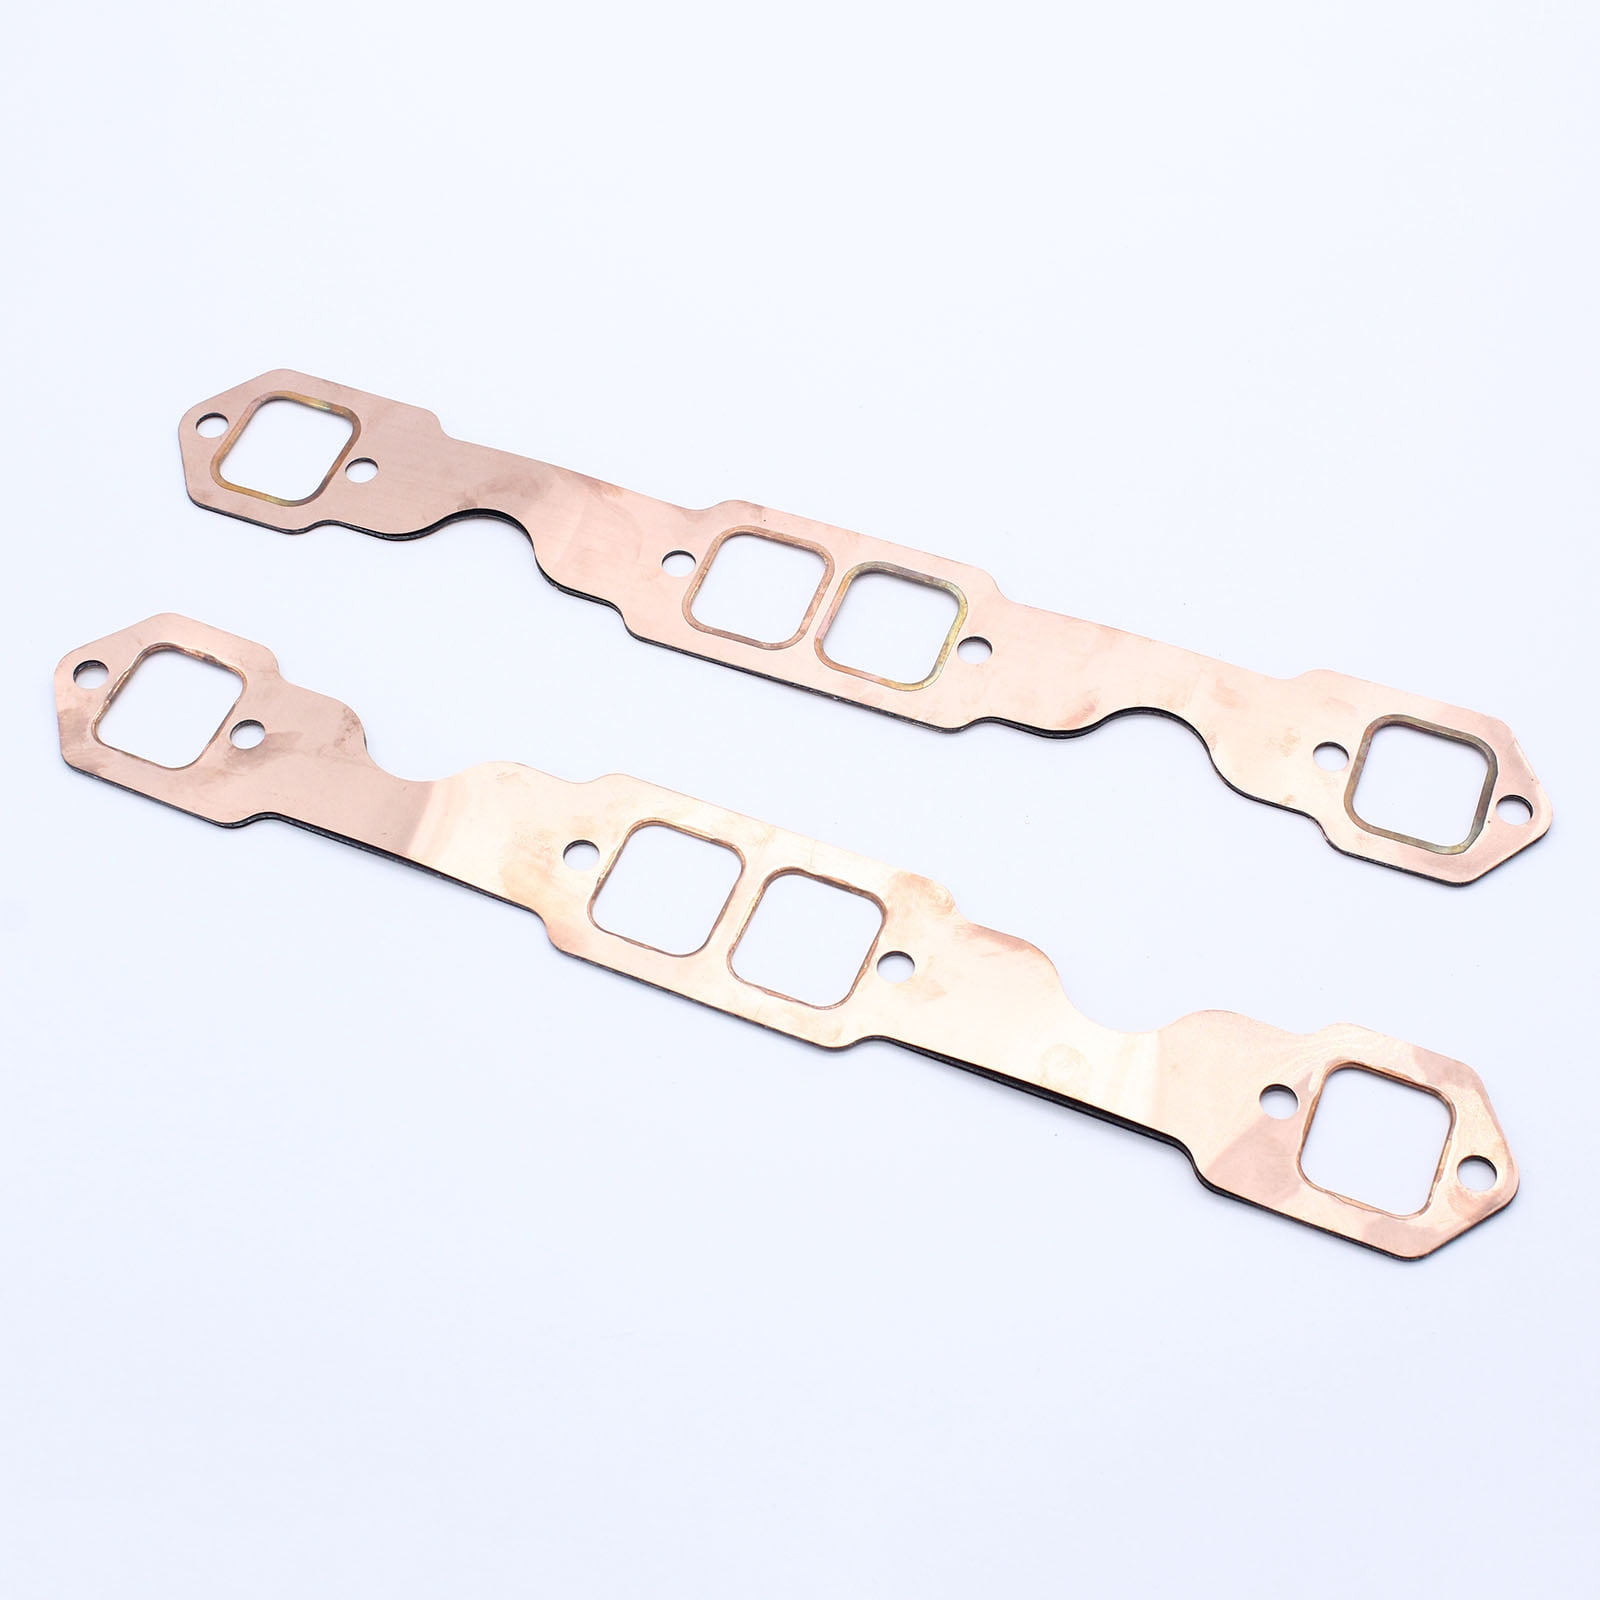 Exhaust Gaskets,2pcs Square Port Copper Header Exhaust Gaskets Reusable Fit for for SB Chevy 327 305 350 383 